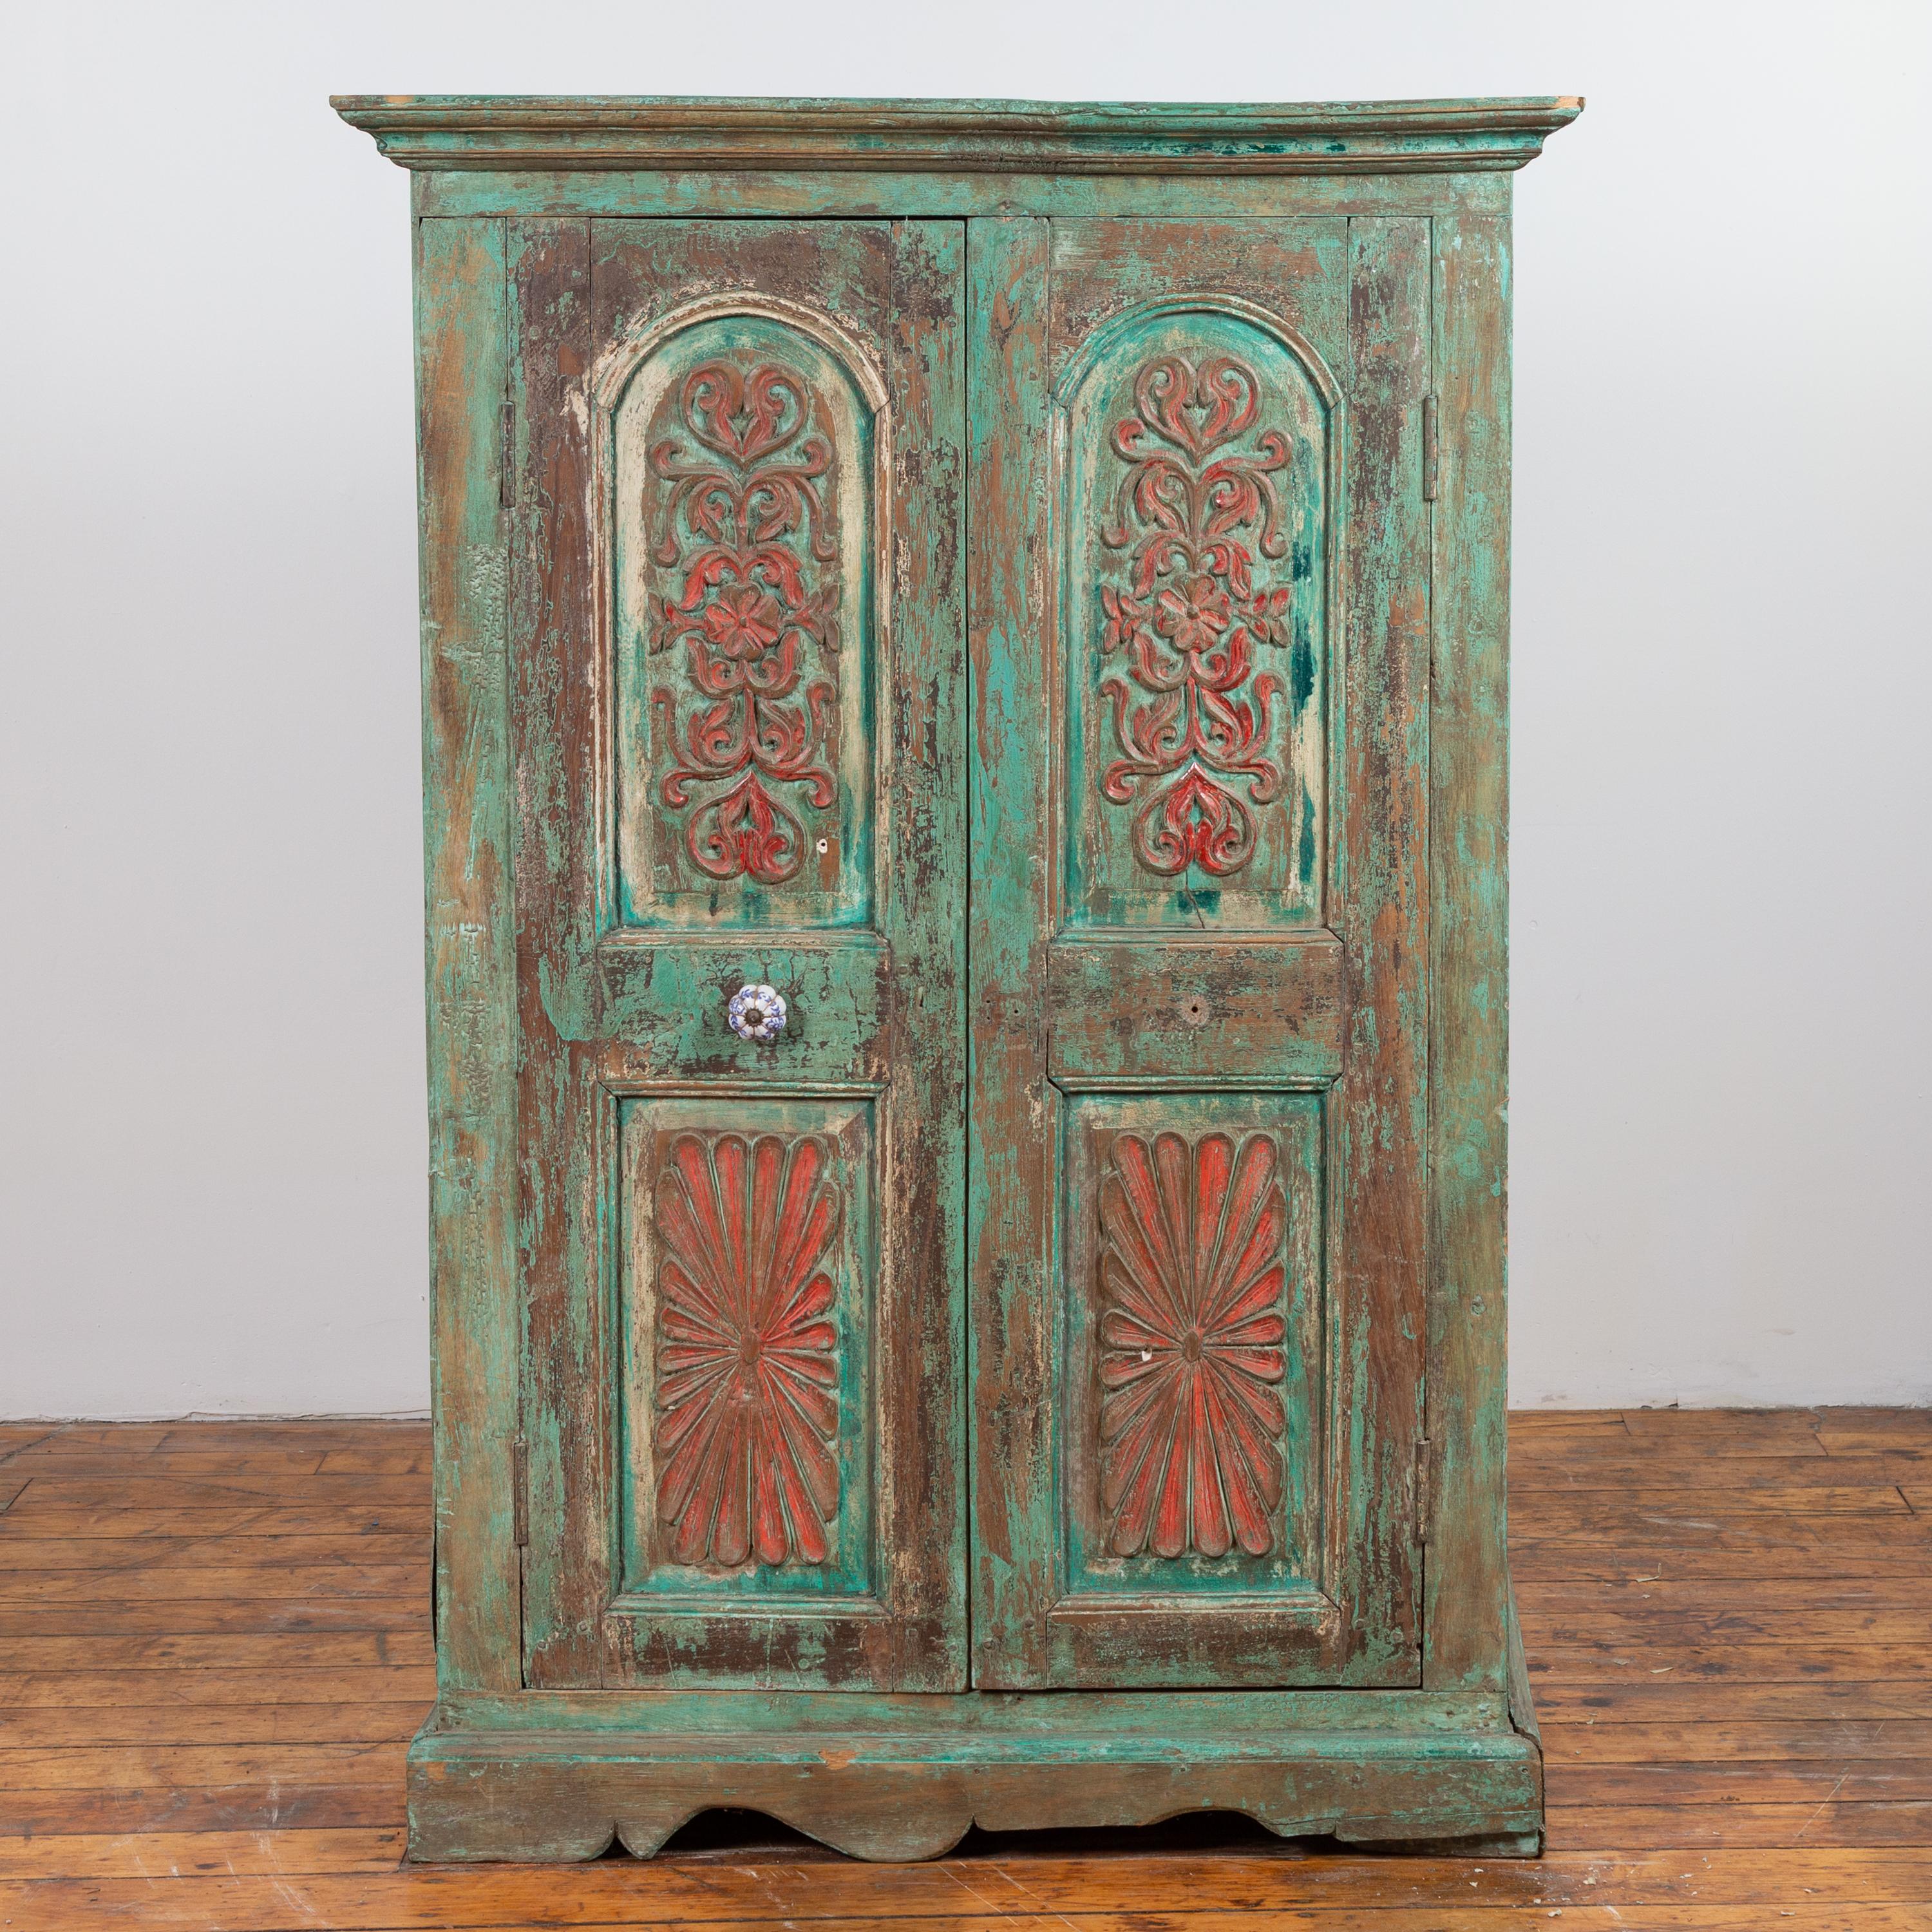 An Indian distressed green painted wooden wardrobe cabinet from the 20th century, with red accents, scrollwork and radiating motifs. Born in India during the 20th century, this charming wooden tall cabinet features a molded cornice, overhanging two